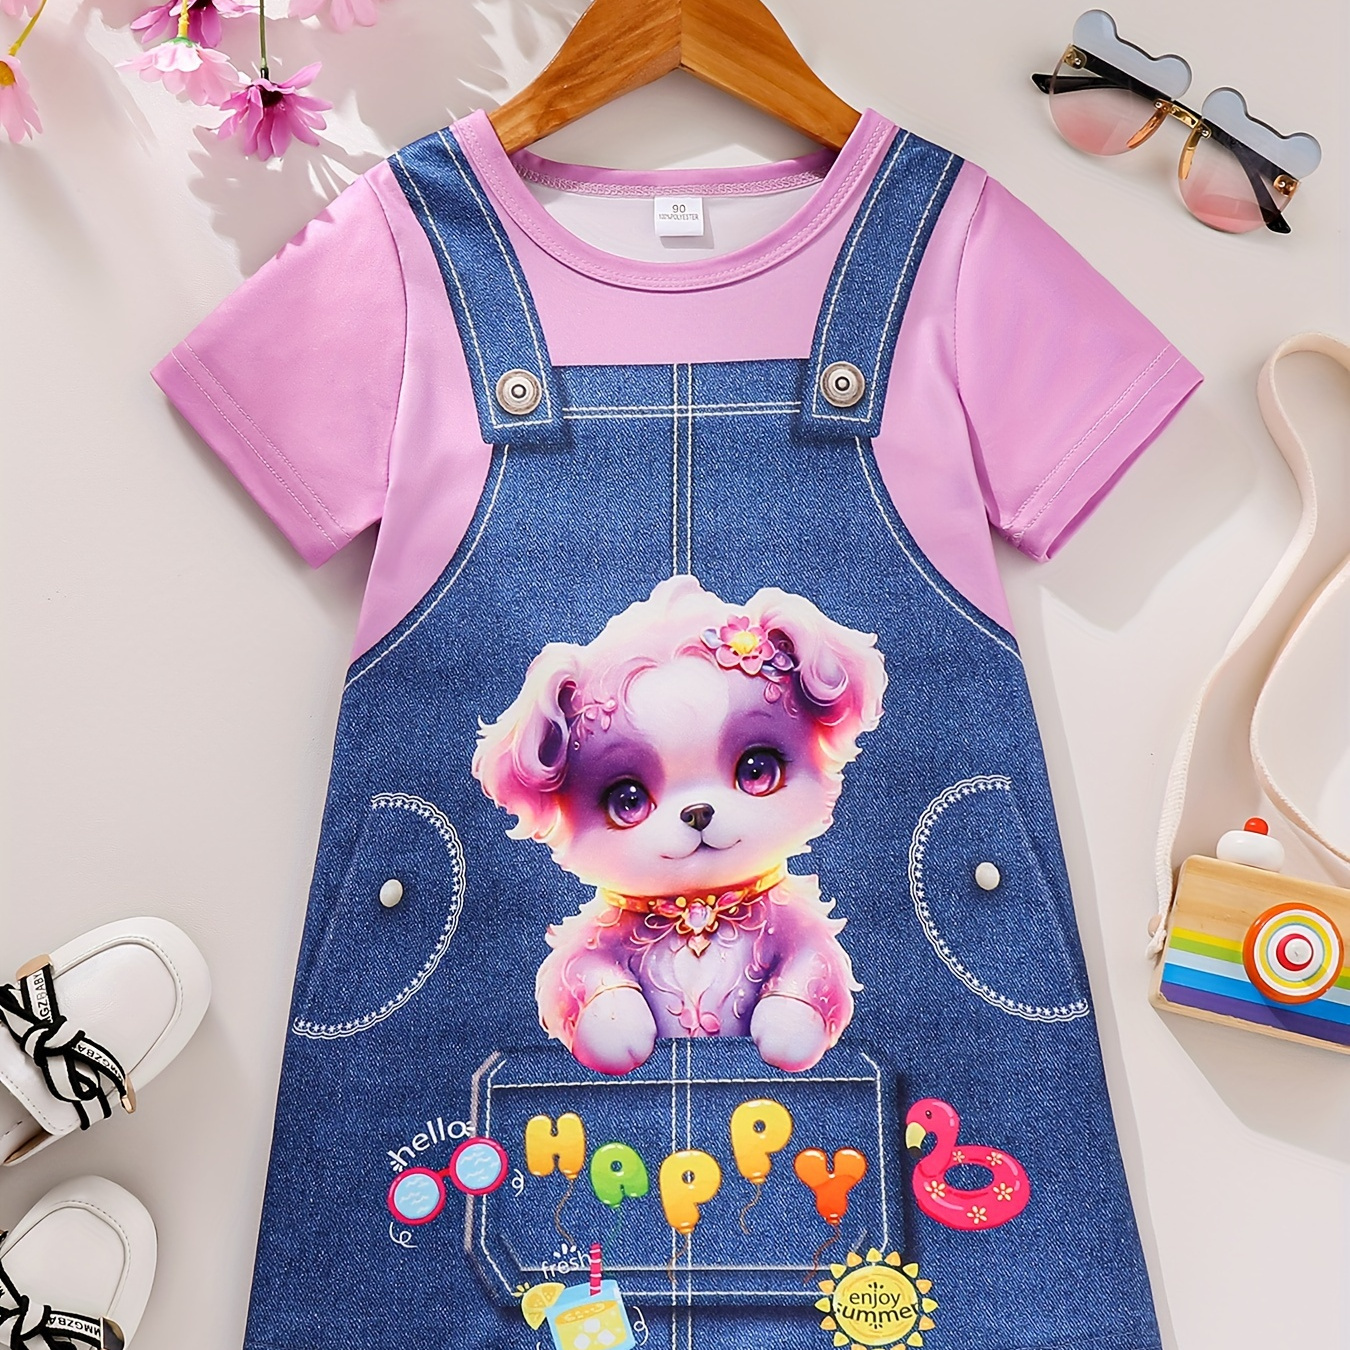 

Puppy & Suspender 3d Pattern T-shirt Dress For Girls Comfy Holiday Casual Dresses, Summer Clothing Gift